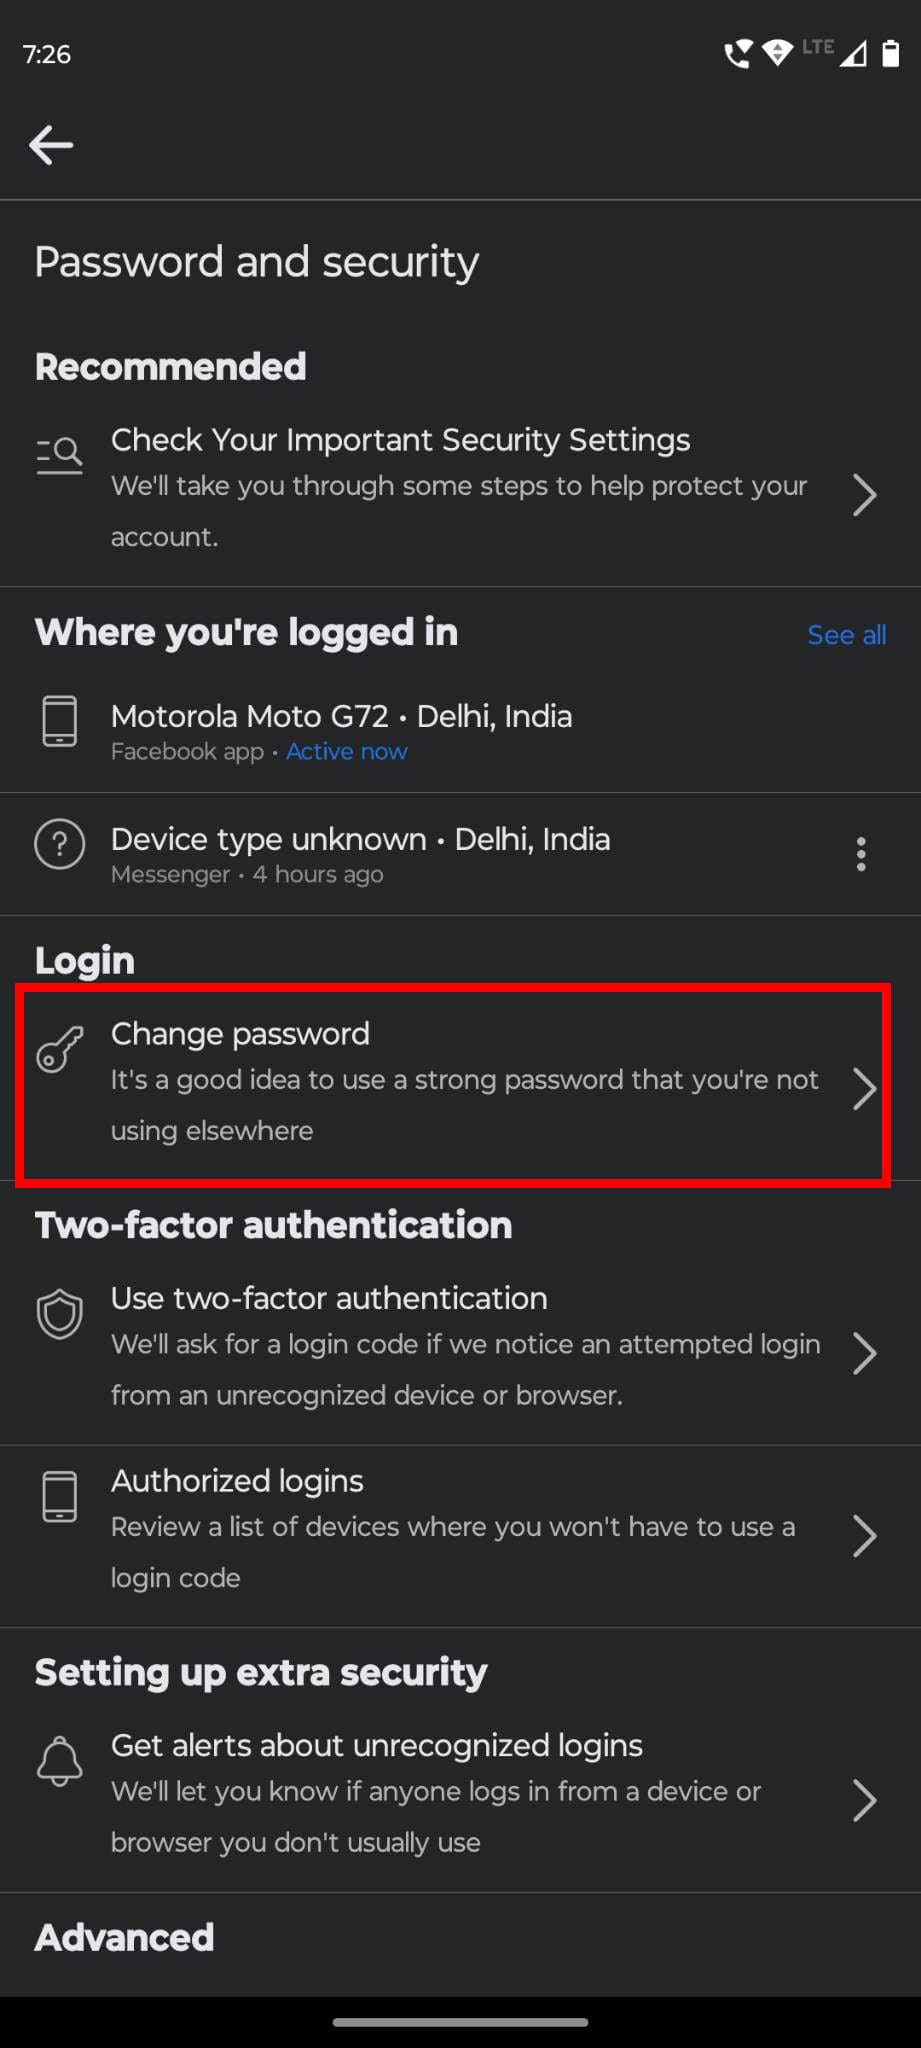 Sign out of all logged in devices after changing password